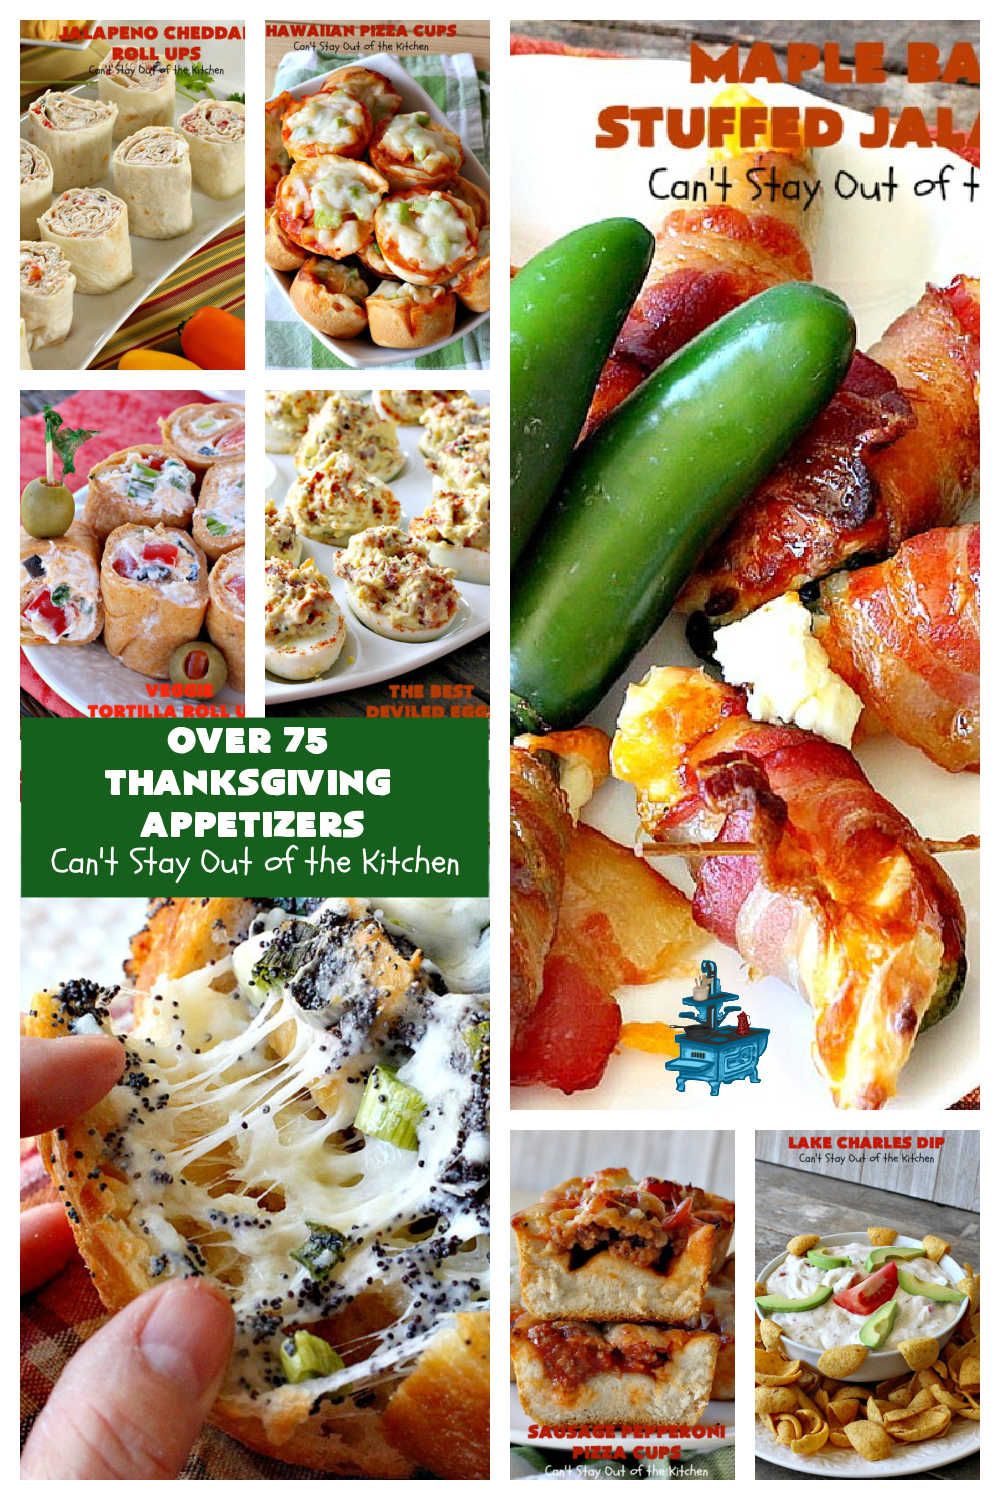 Thanksgiving Appetizers | Can't Stay Out of the Kitchen | Over 75 favorite #appetizer #recipes including #RollUps #TortillaPinwheels #guacamole #hummus #TexMex, #PizzaCups & so much more. Great ideas for snacking on during the #Thanksgiving #FootBallGame. Many of these are #GlutenFree. #tailgating #appetizers #holiday #HolidayAppetizers #ThanksgivingAppetizers